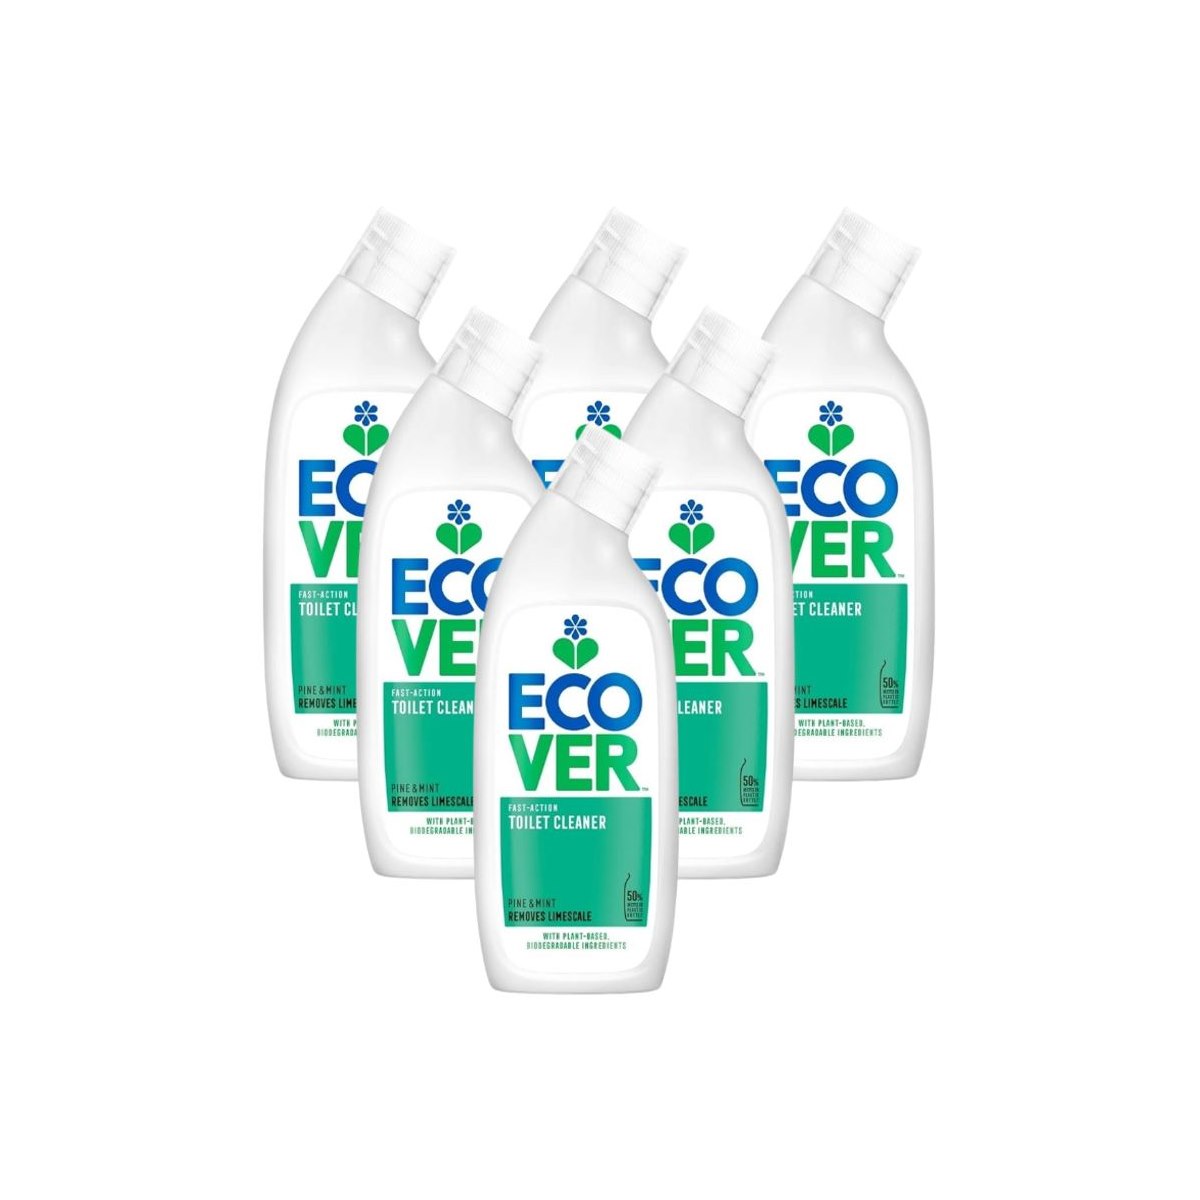 Case of 6 x Ecover Fast Action Toilet Cleaner Pine and Mint 750ml